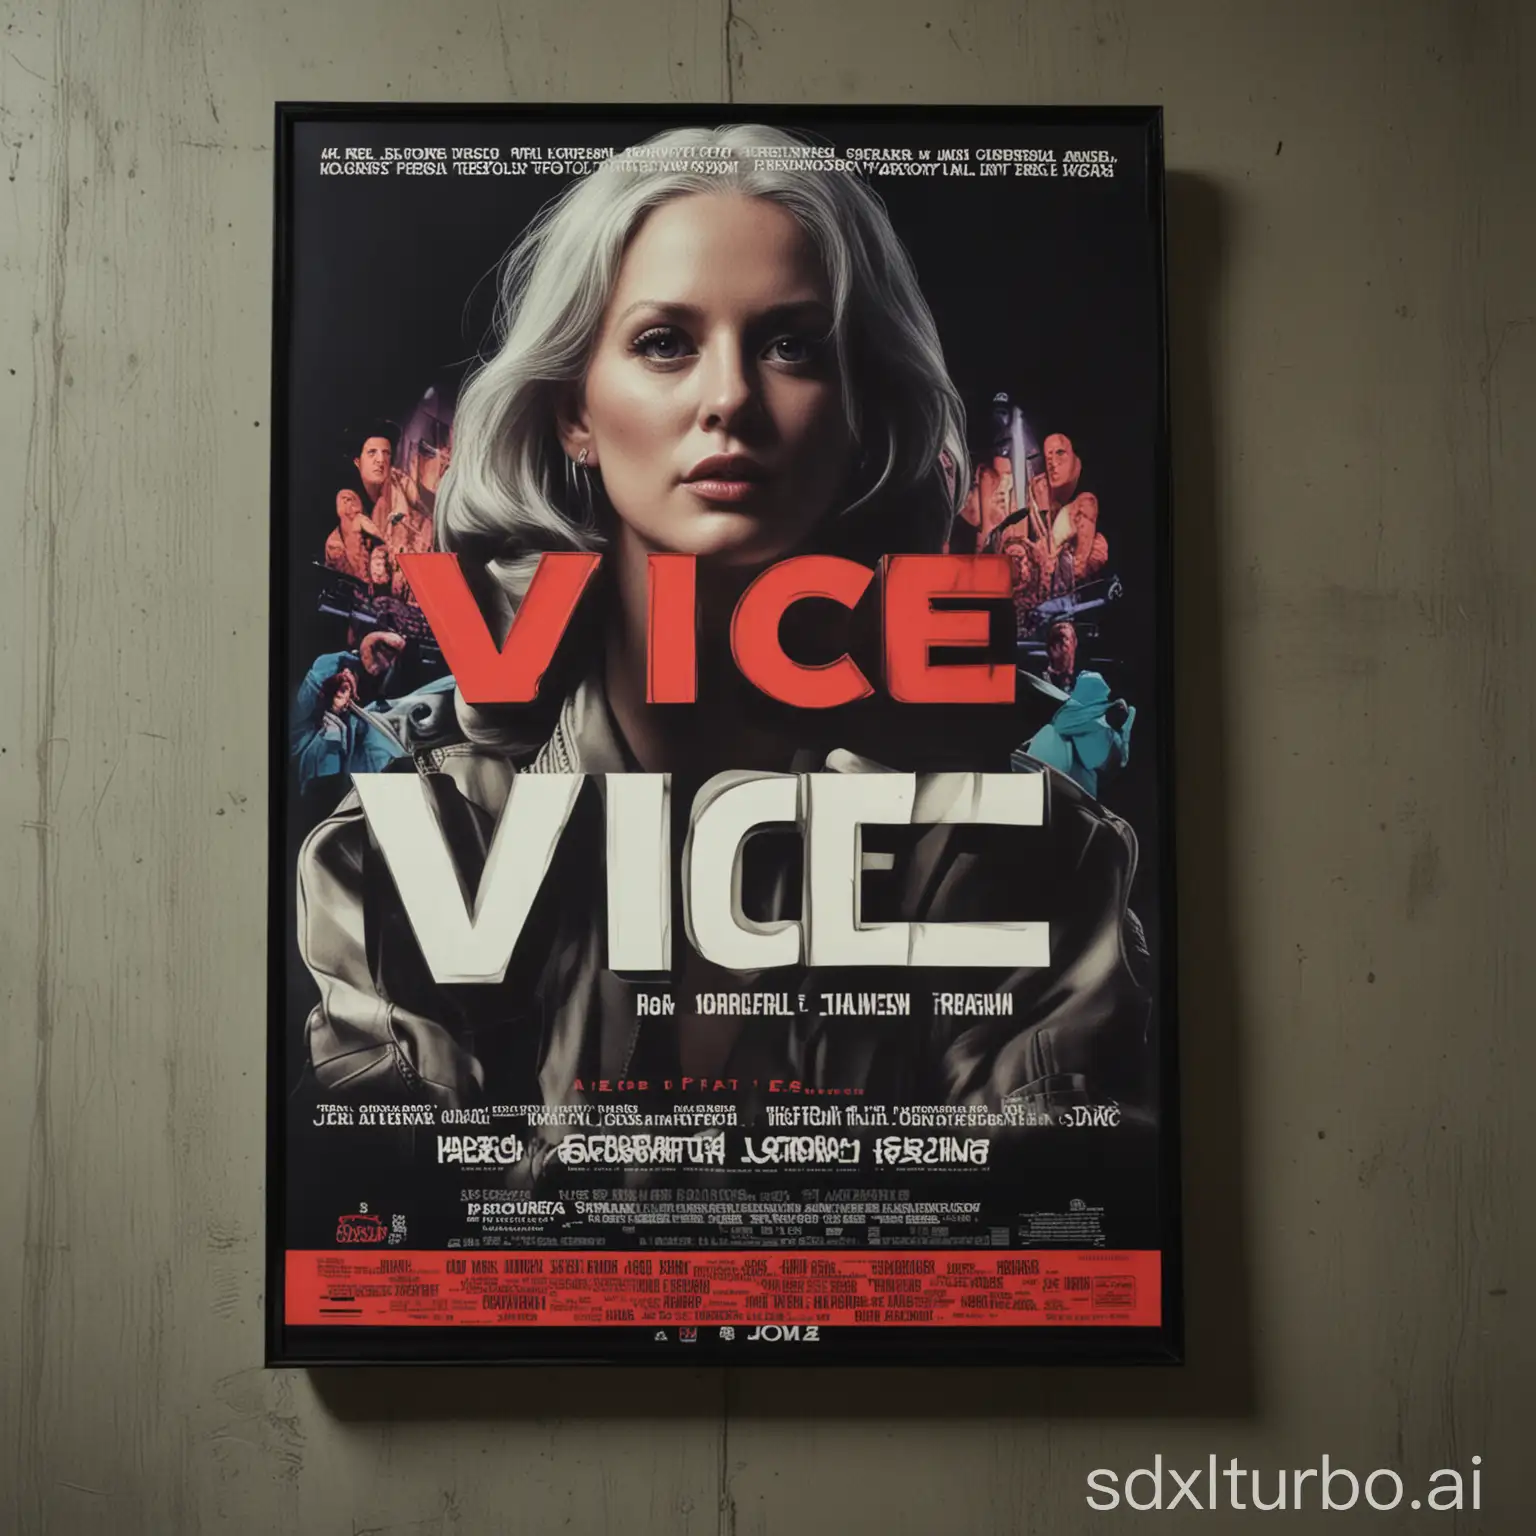 Intense-Drama-Unfolding-in-Vice-City-A-Cinematic-Poster